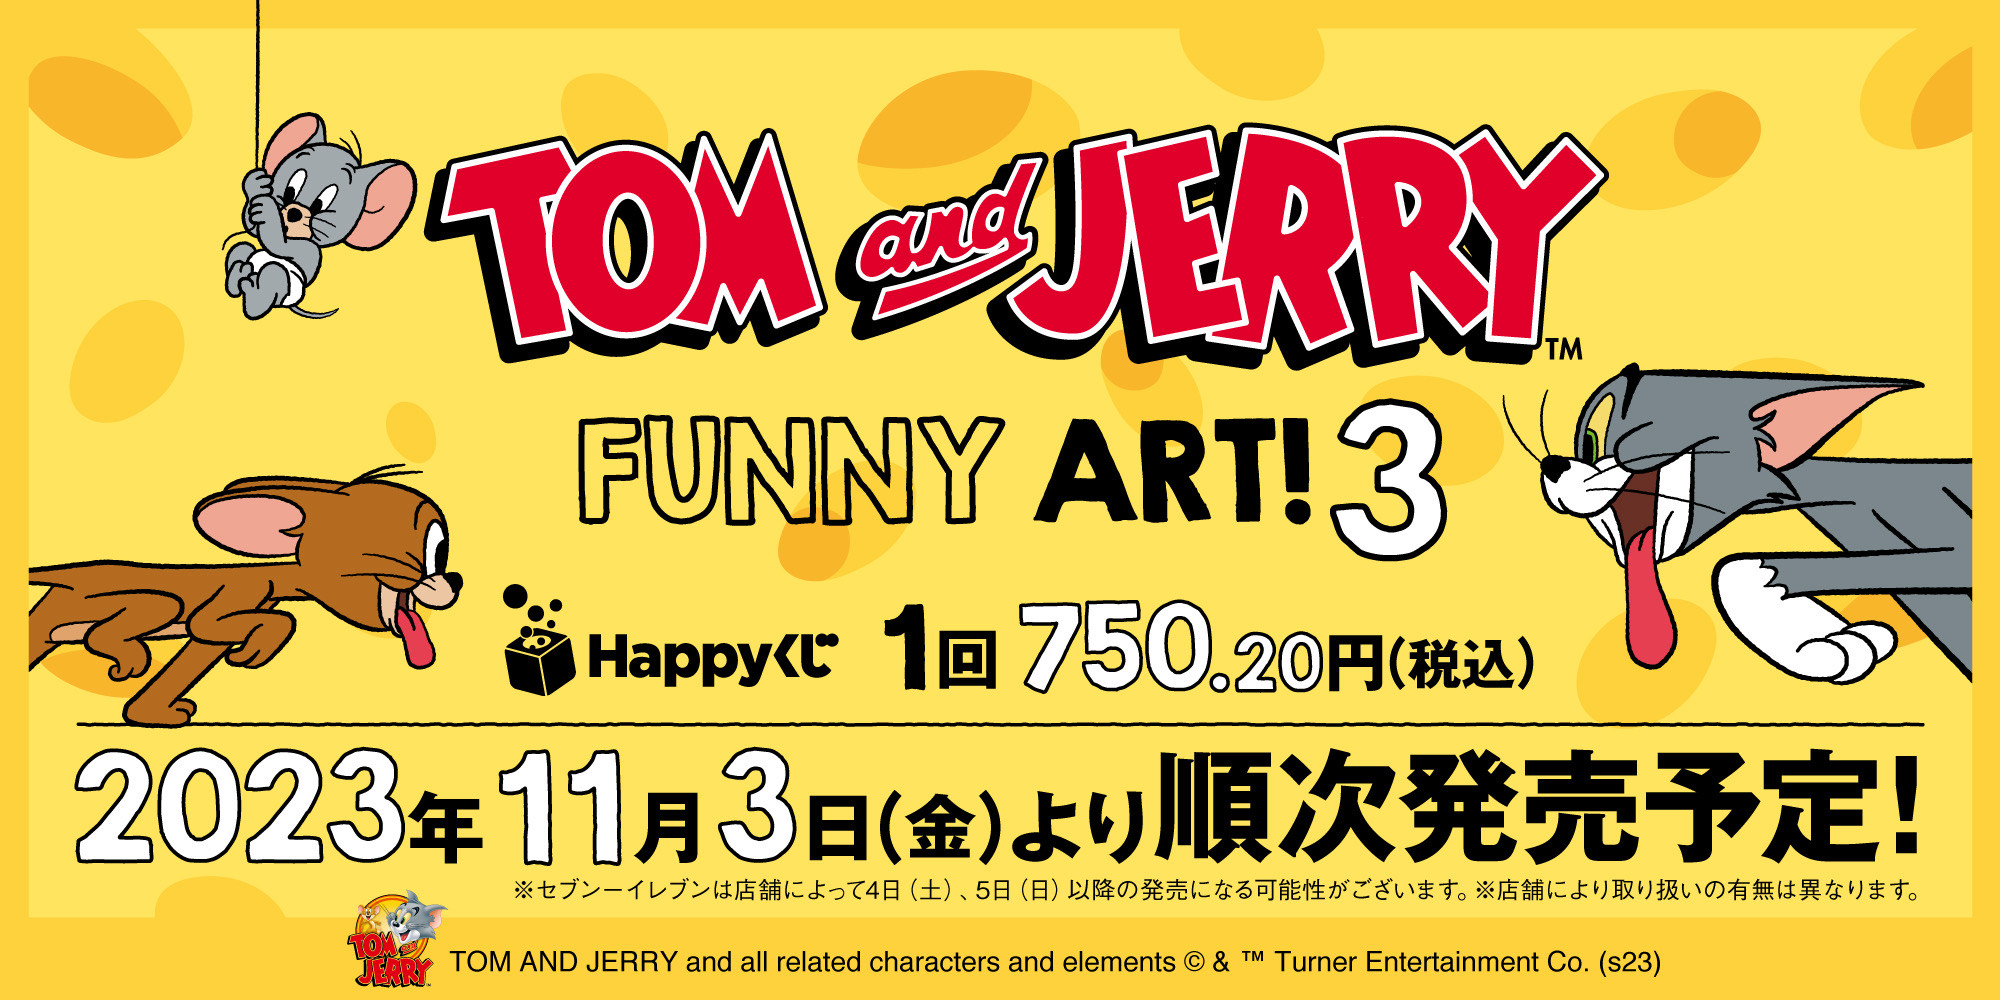 『TOM and JERRY FUNNY ART!』3